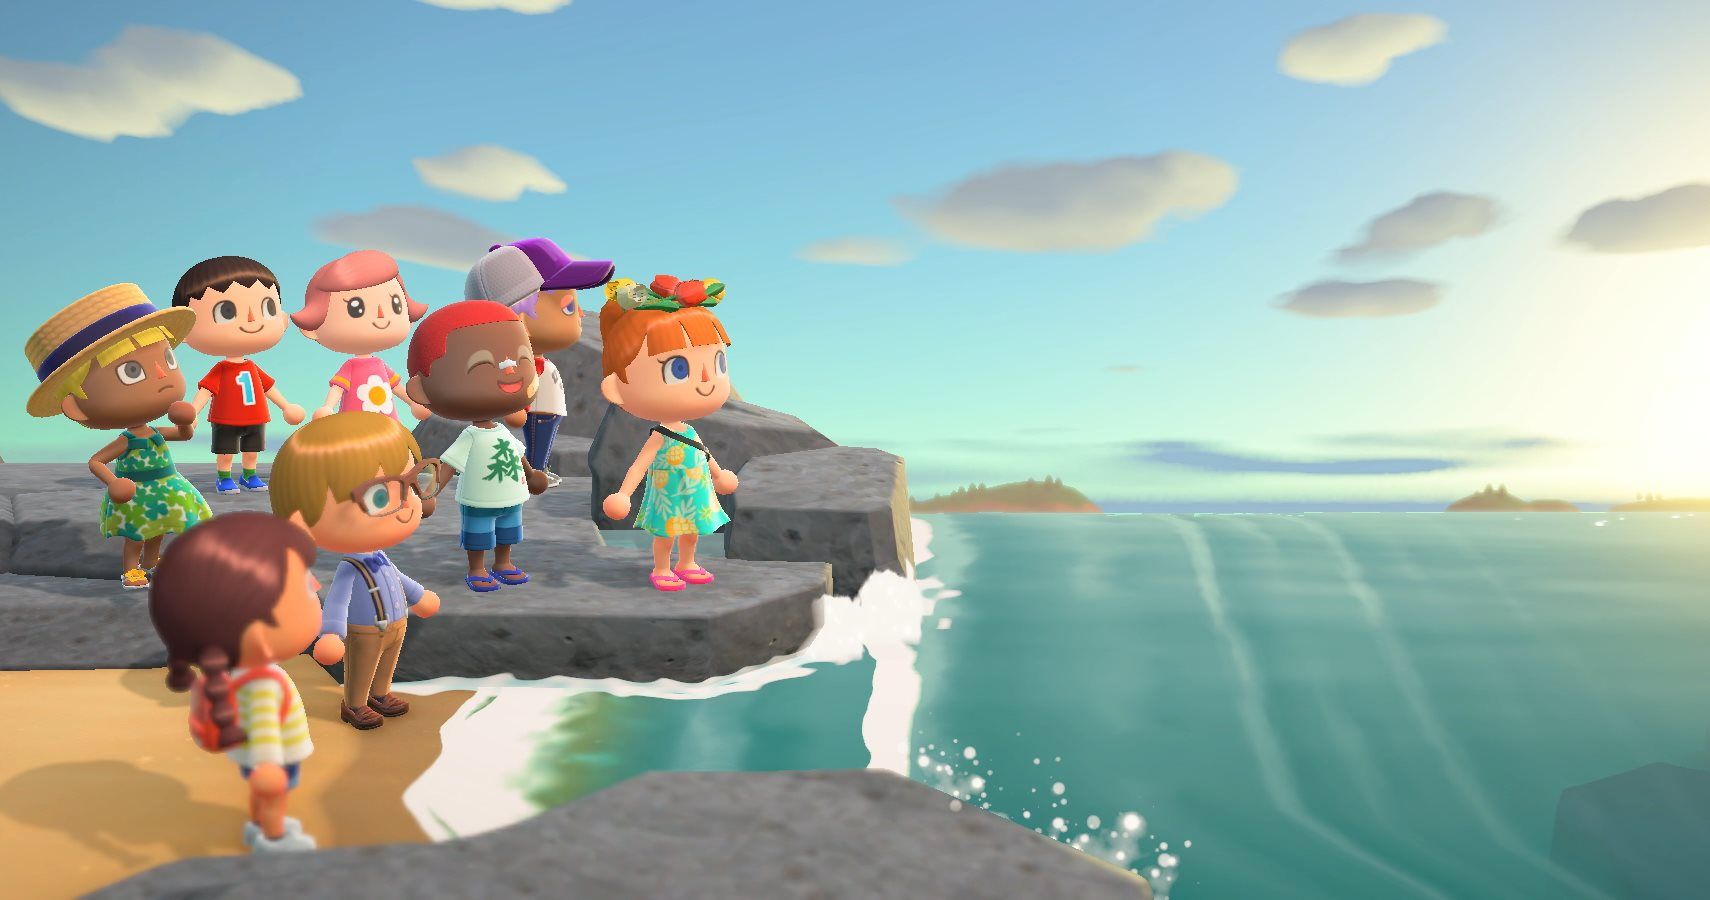 E3 2019 For The First Time Animal Crossings Villagers Can Be Any Race And GenderFluid